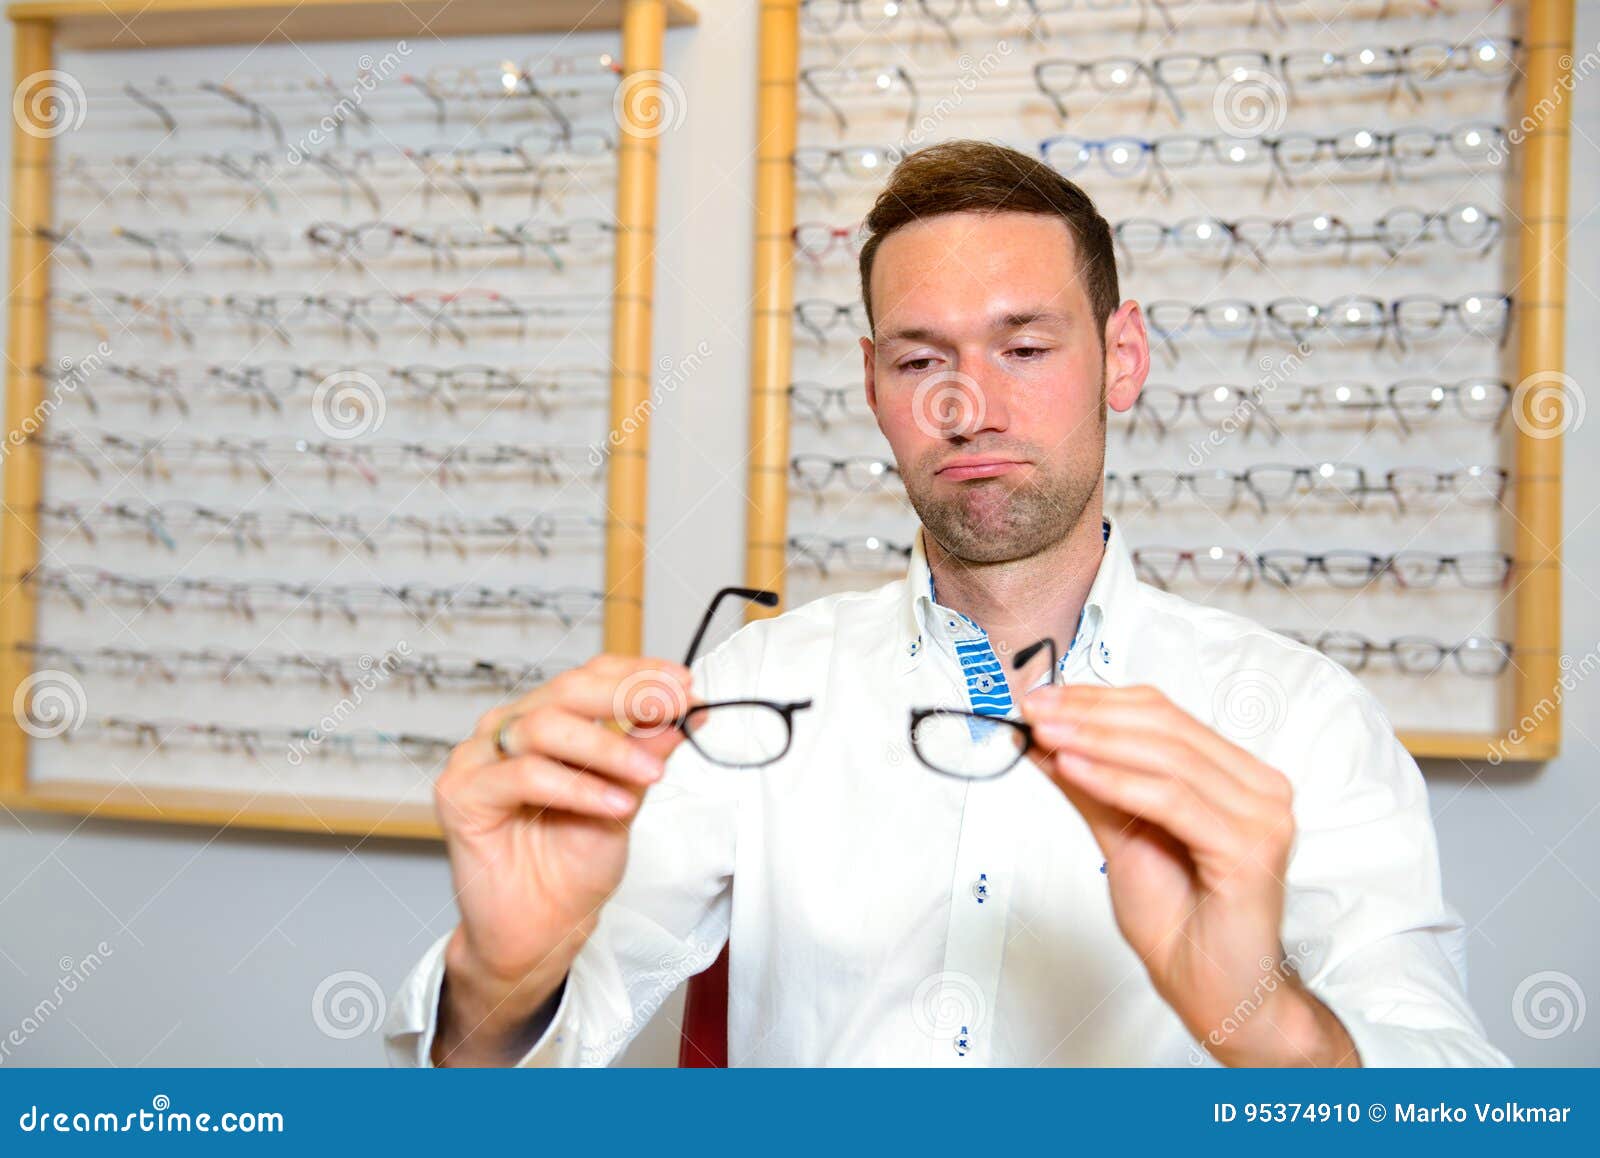 In Optician Shop- Young Man with Broken Glasses Stock Photo - Image of ...